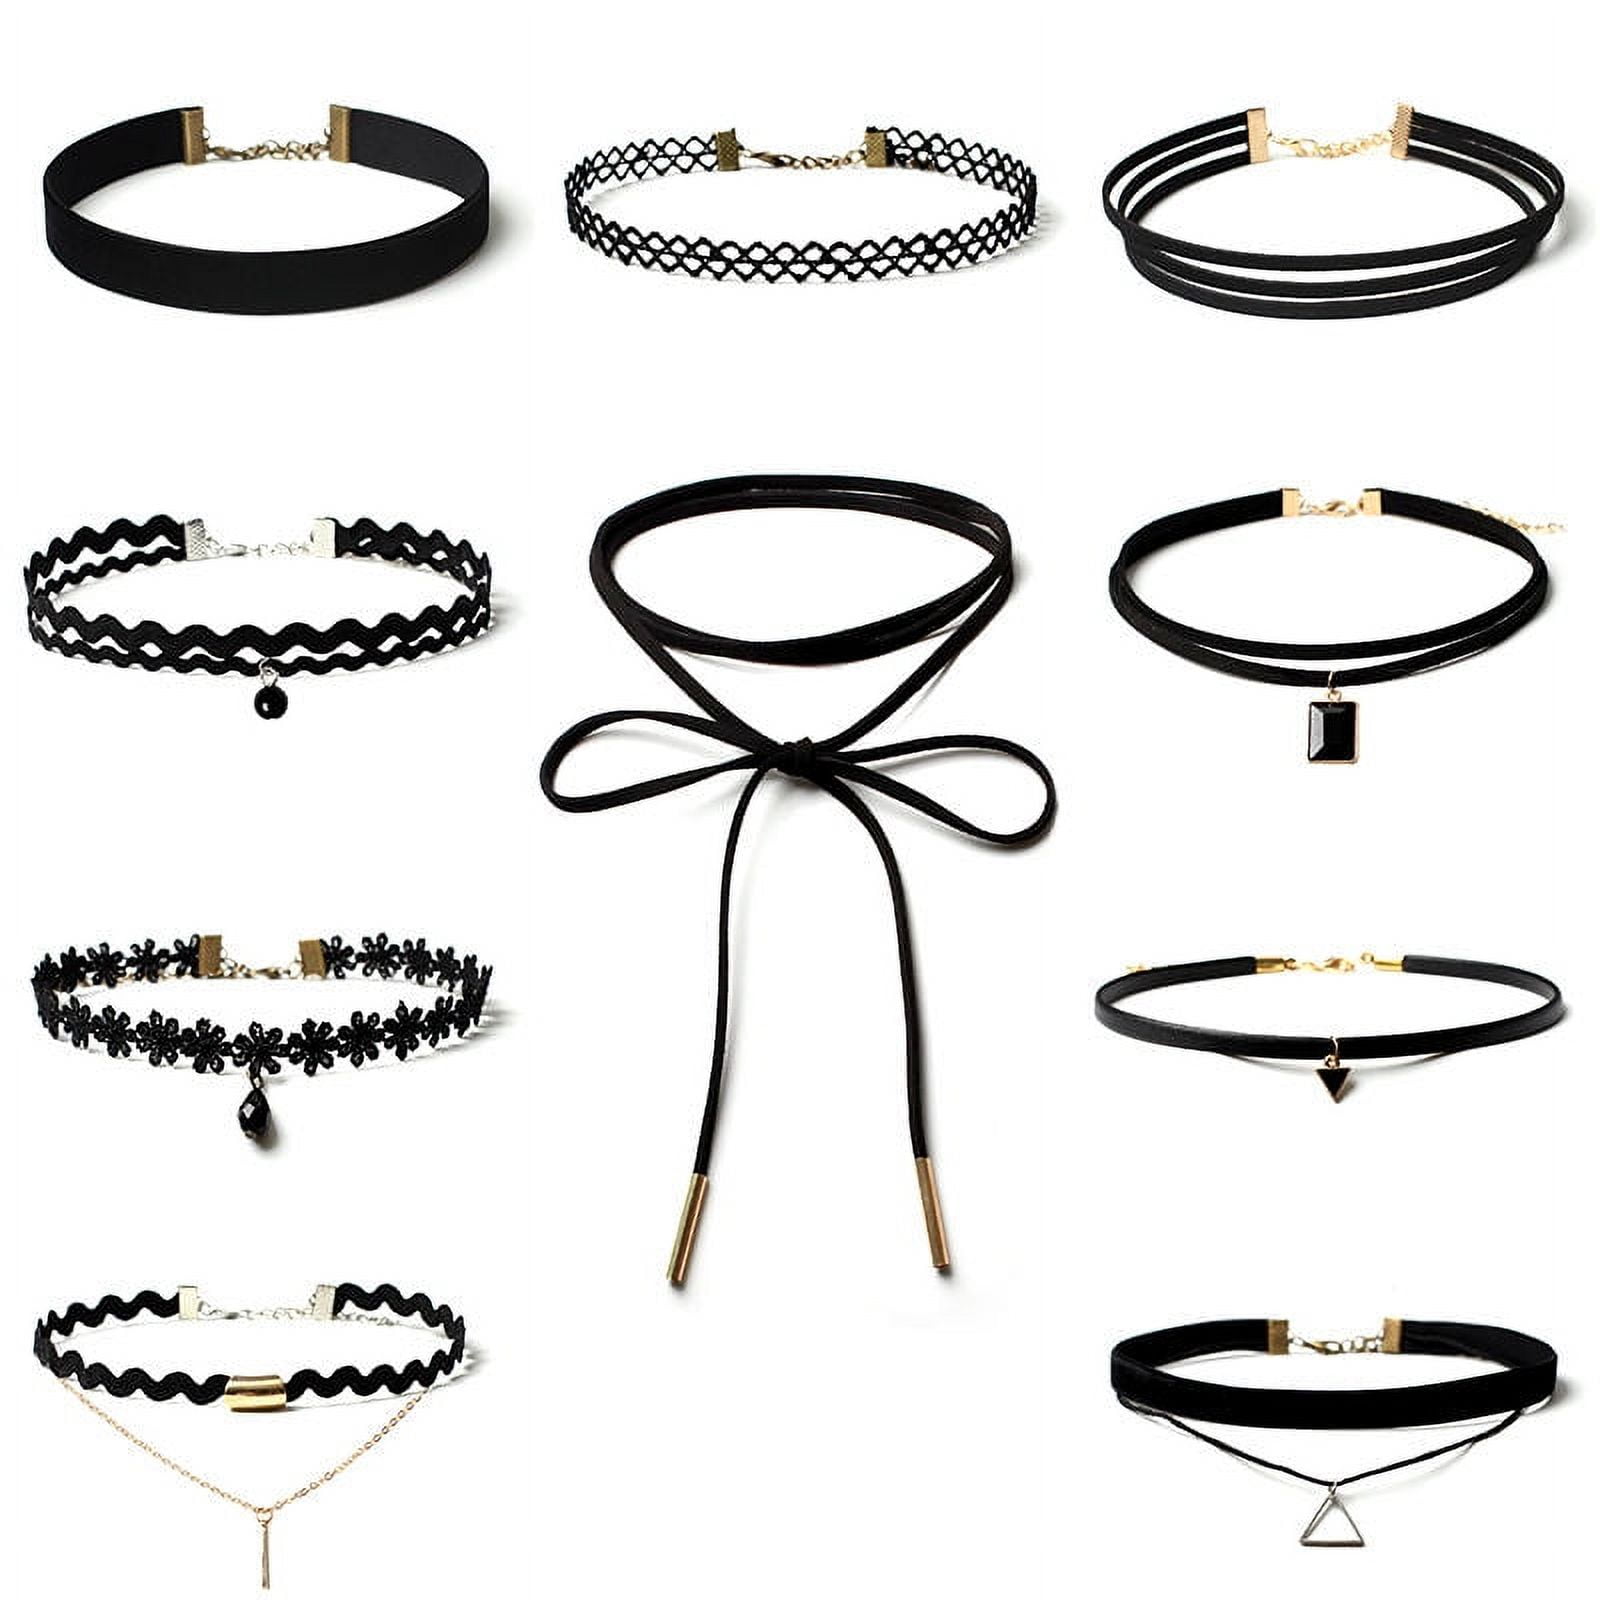 Trasfit 10 Pieces Lace Choker Necklace for Women Girls, Black Classic  Velvet Stretch Punk Gothic Tattoo